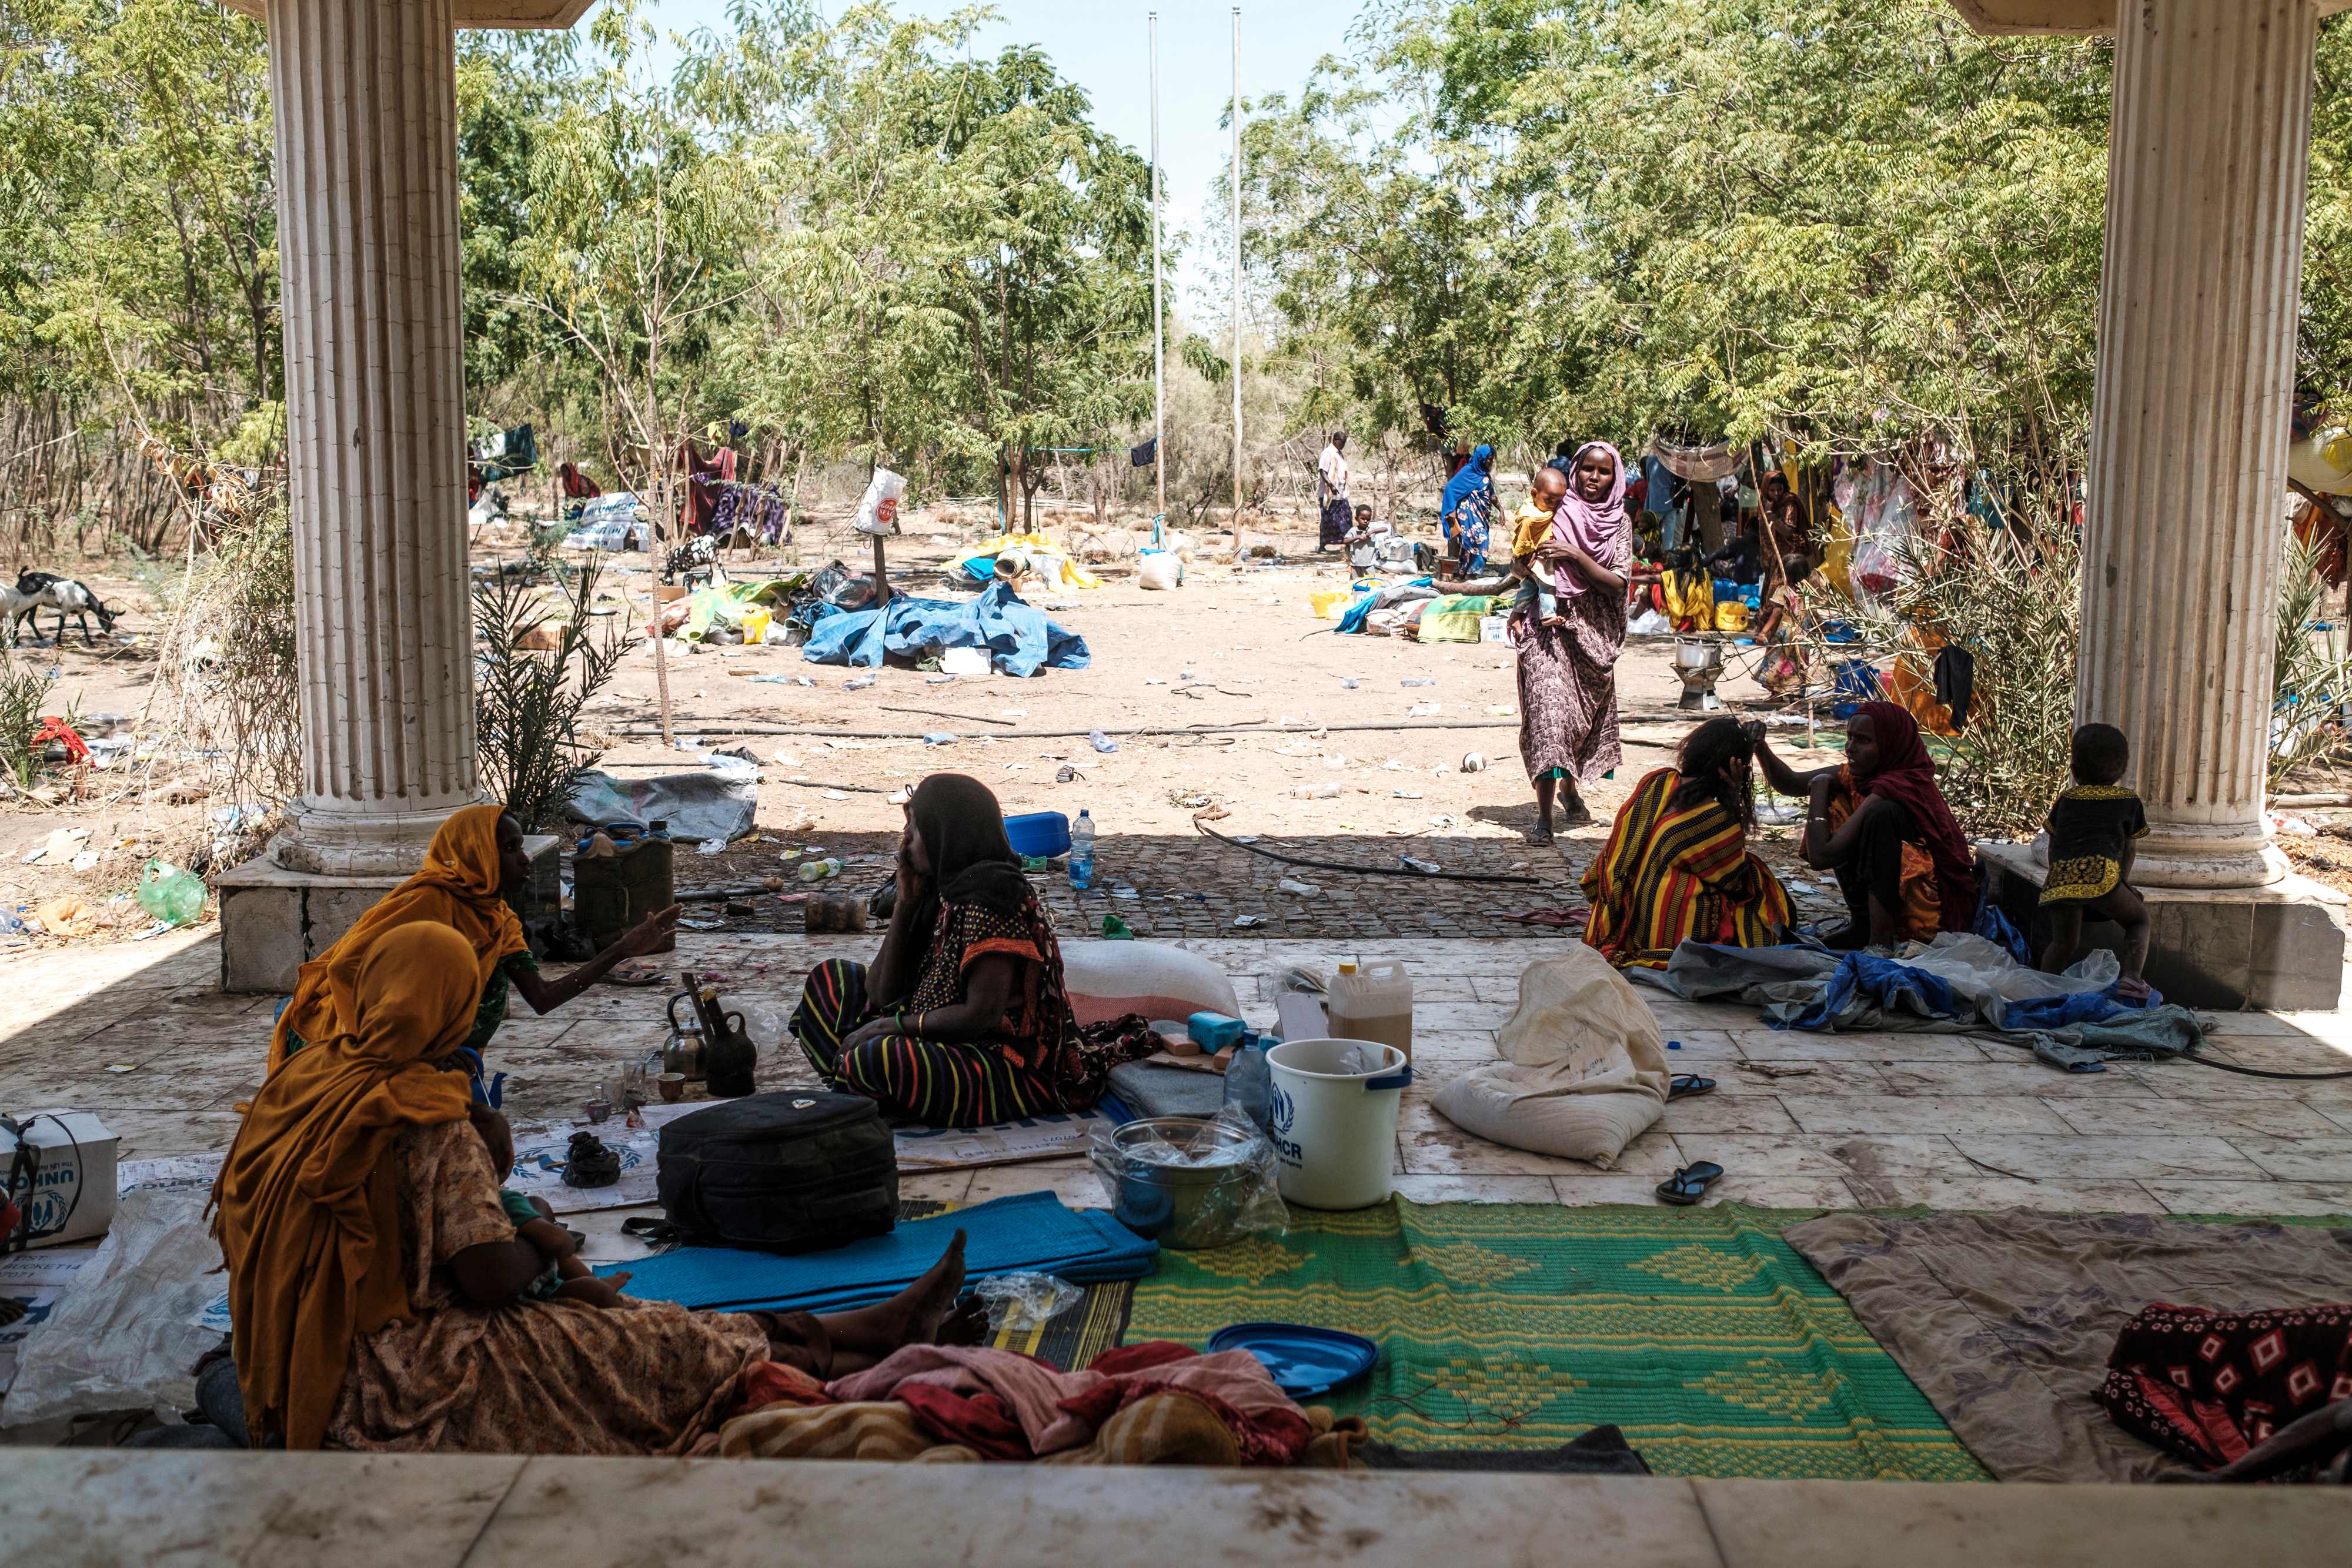 An attack on the Bahrale camp this month was part of a broader offensive in Afar that diplomats say represents the latest setback to the prospect of peace talks.